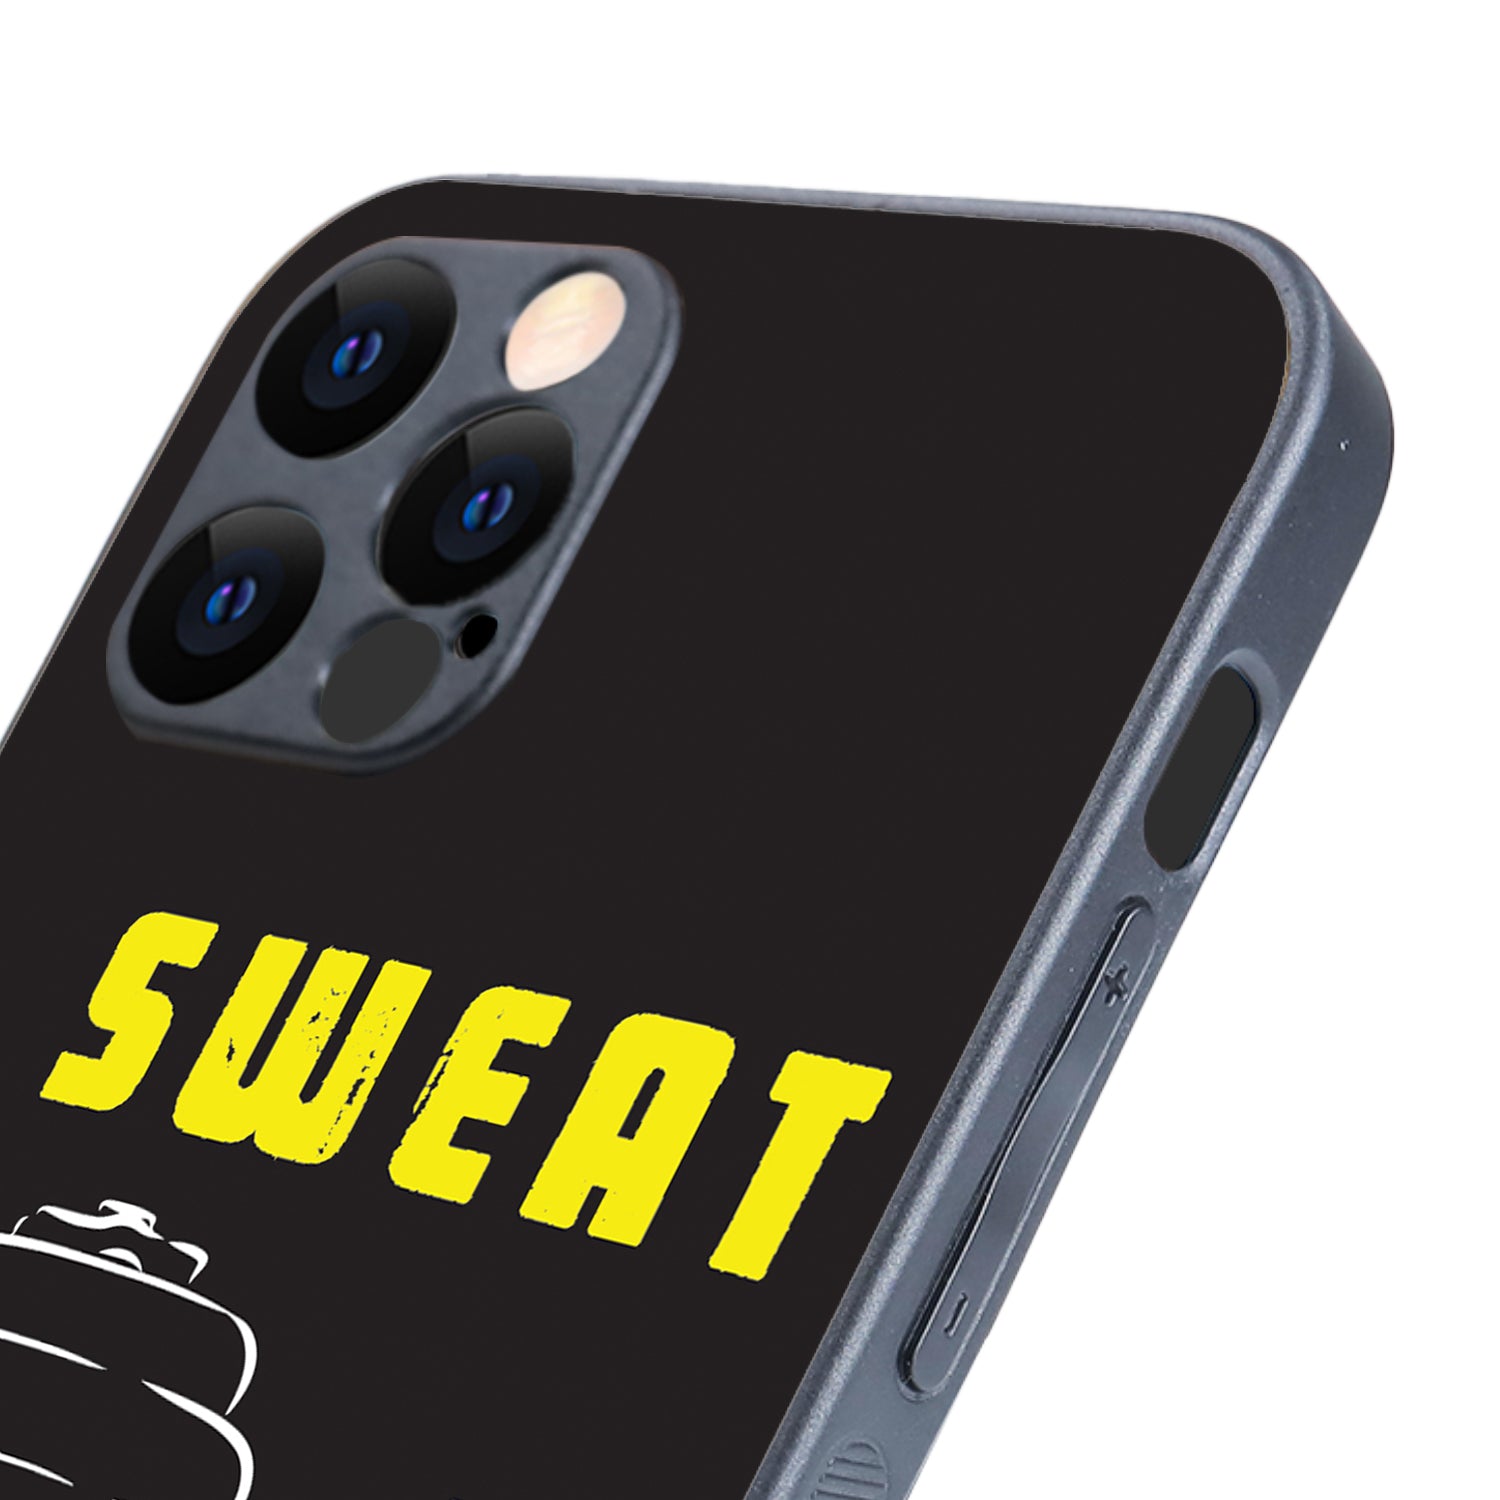 Sweat It Out Motivational Quotes iPhone 12 Pro Case